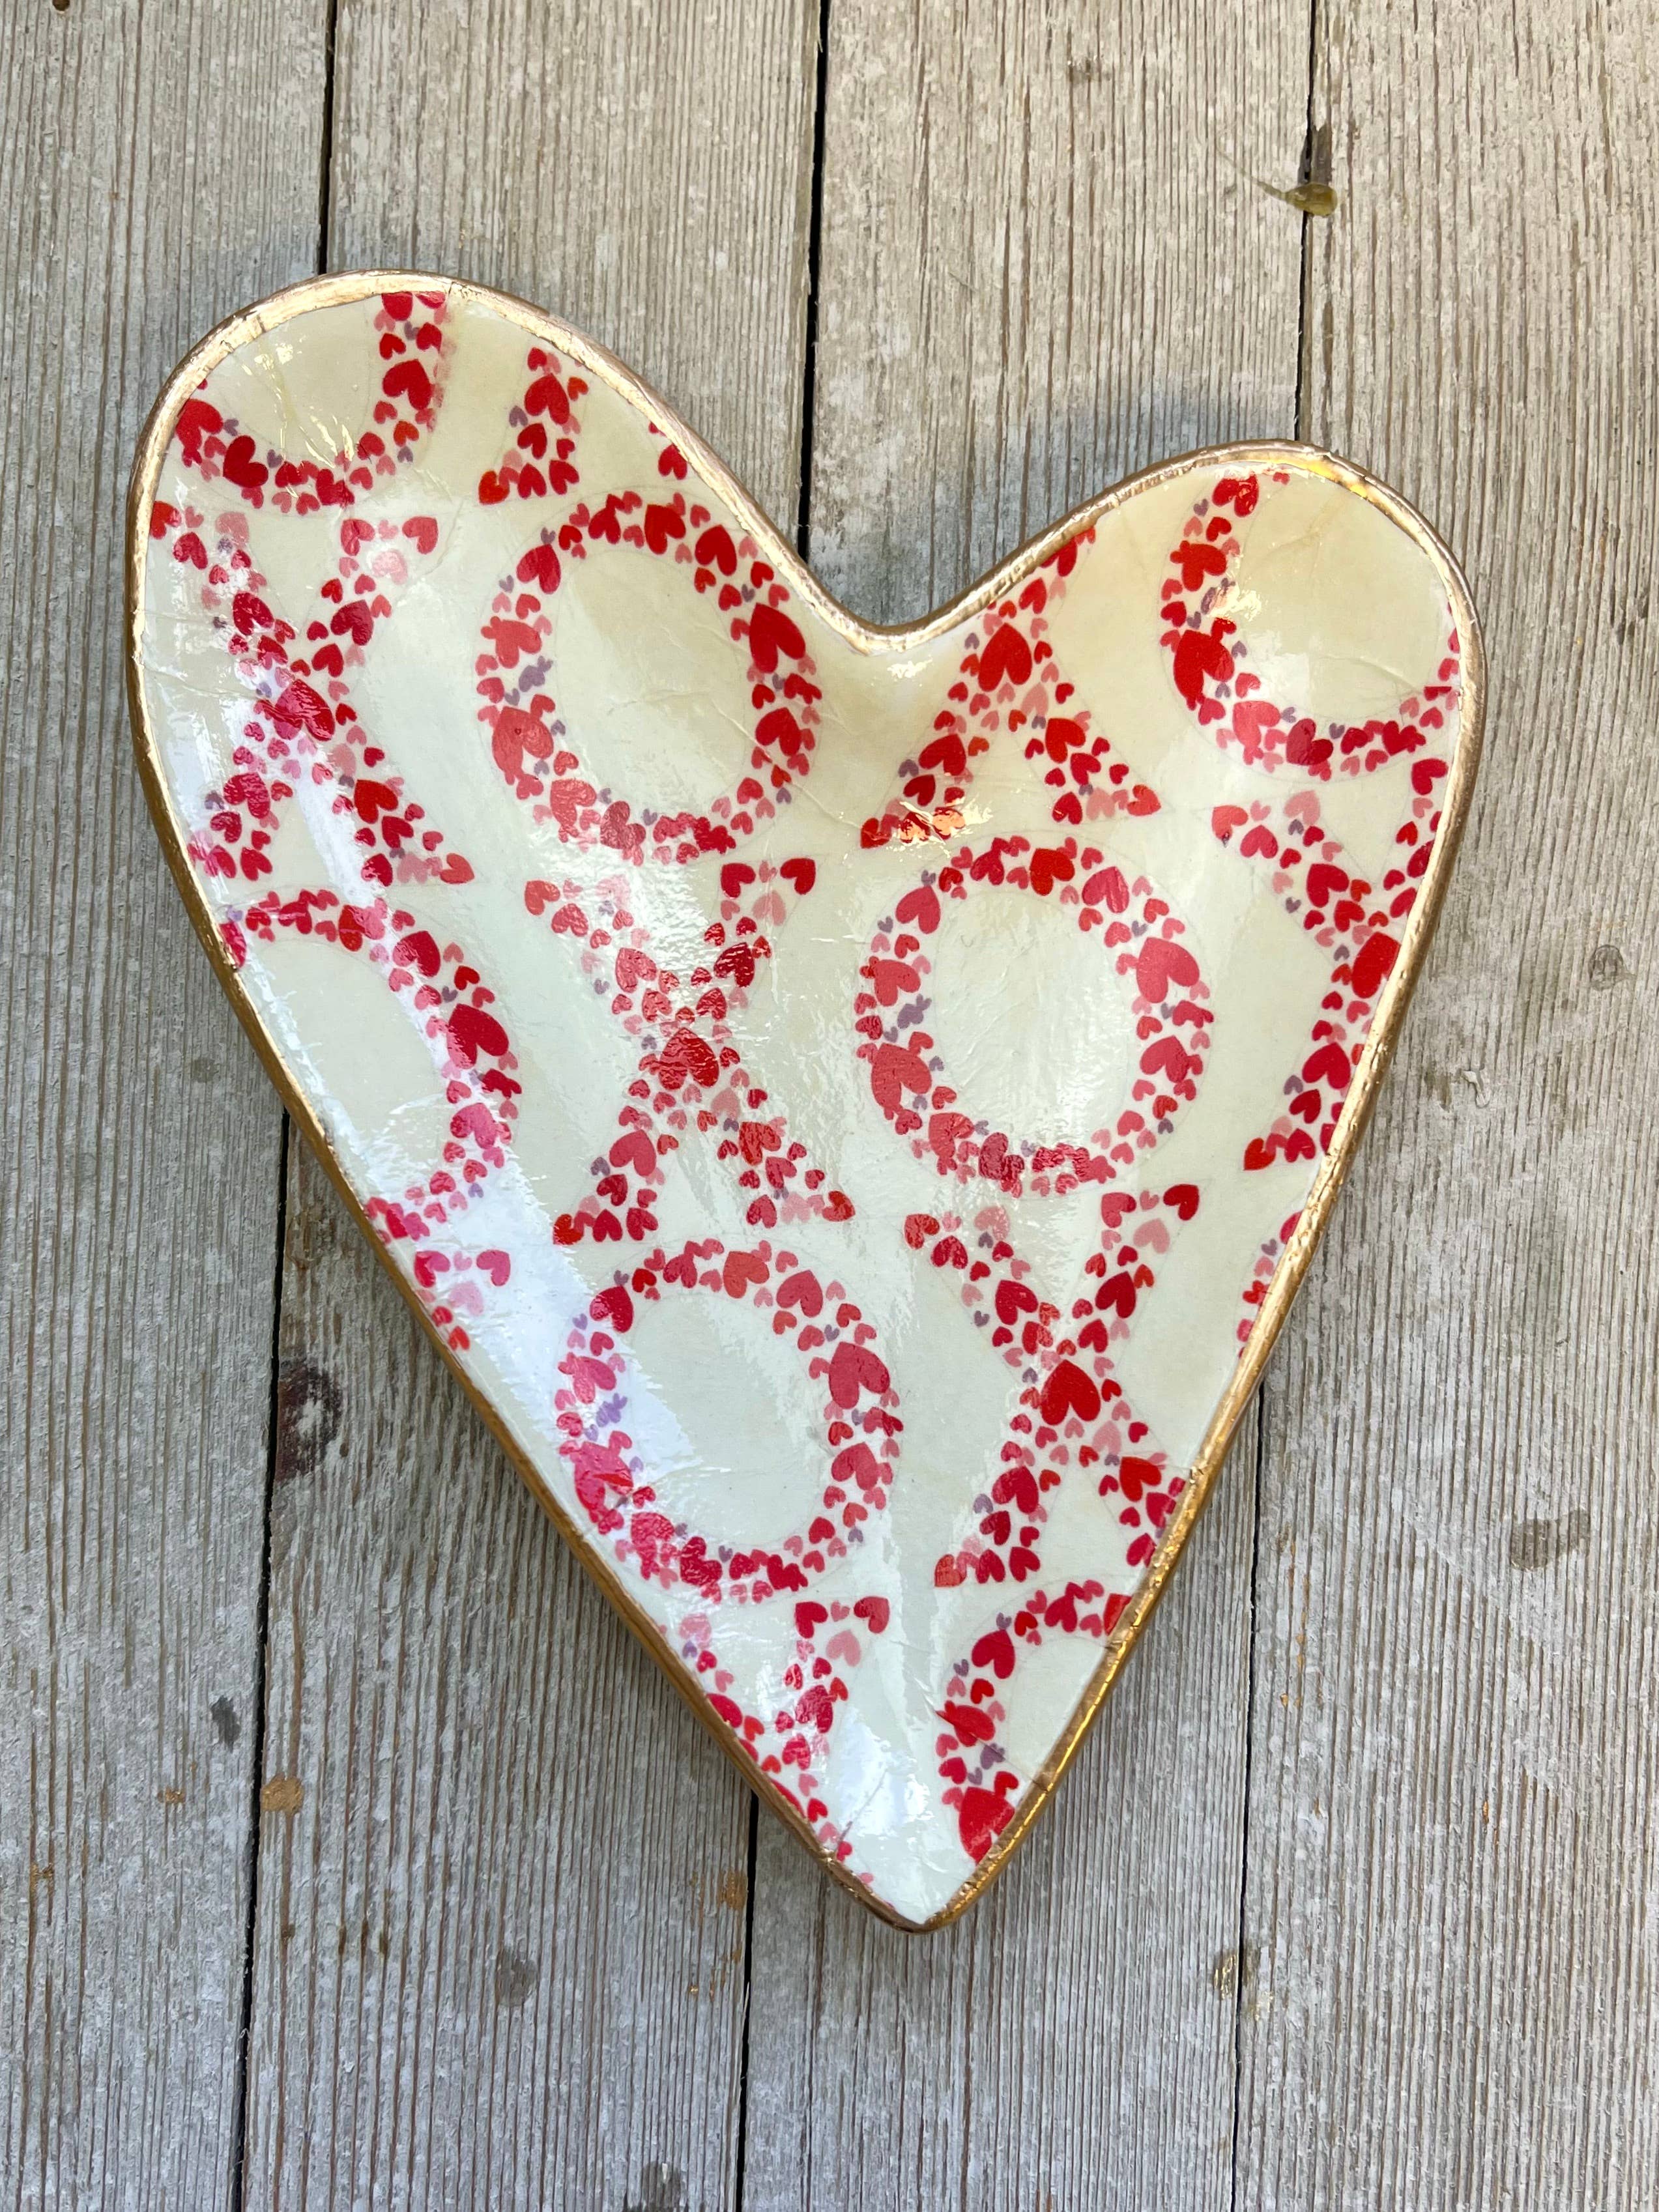 Easter & Valentines Ceramic Heart Dish: Red Hearts